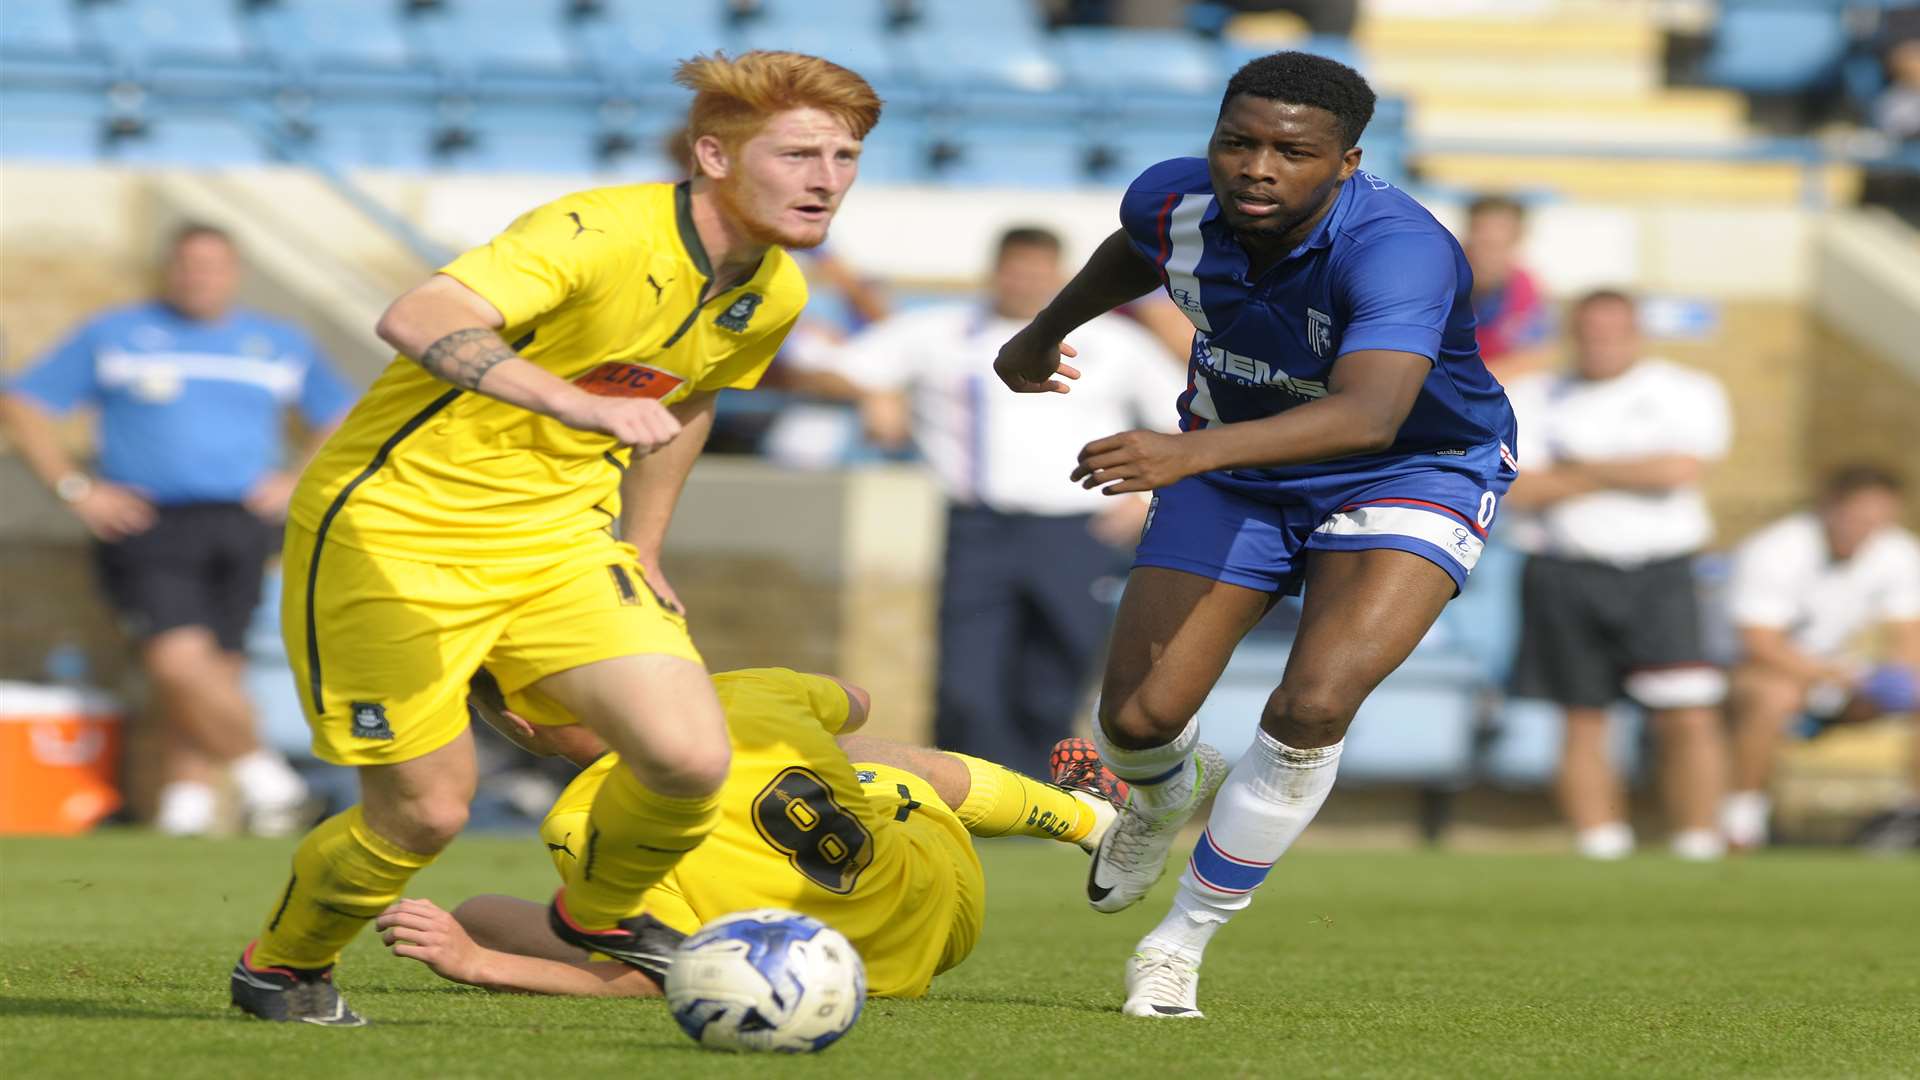 Antonio German in action for Gillingham's development squad against Plymouth